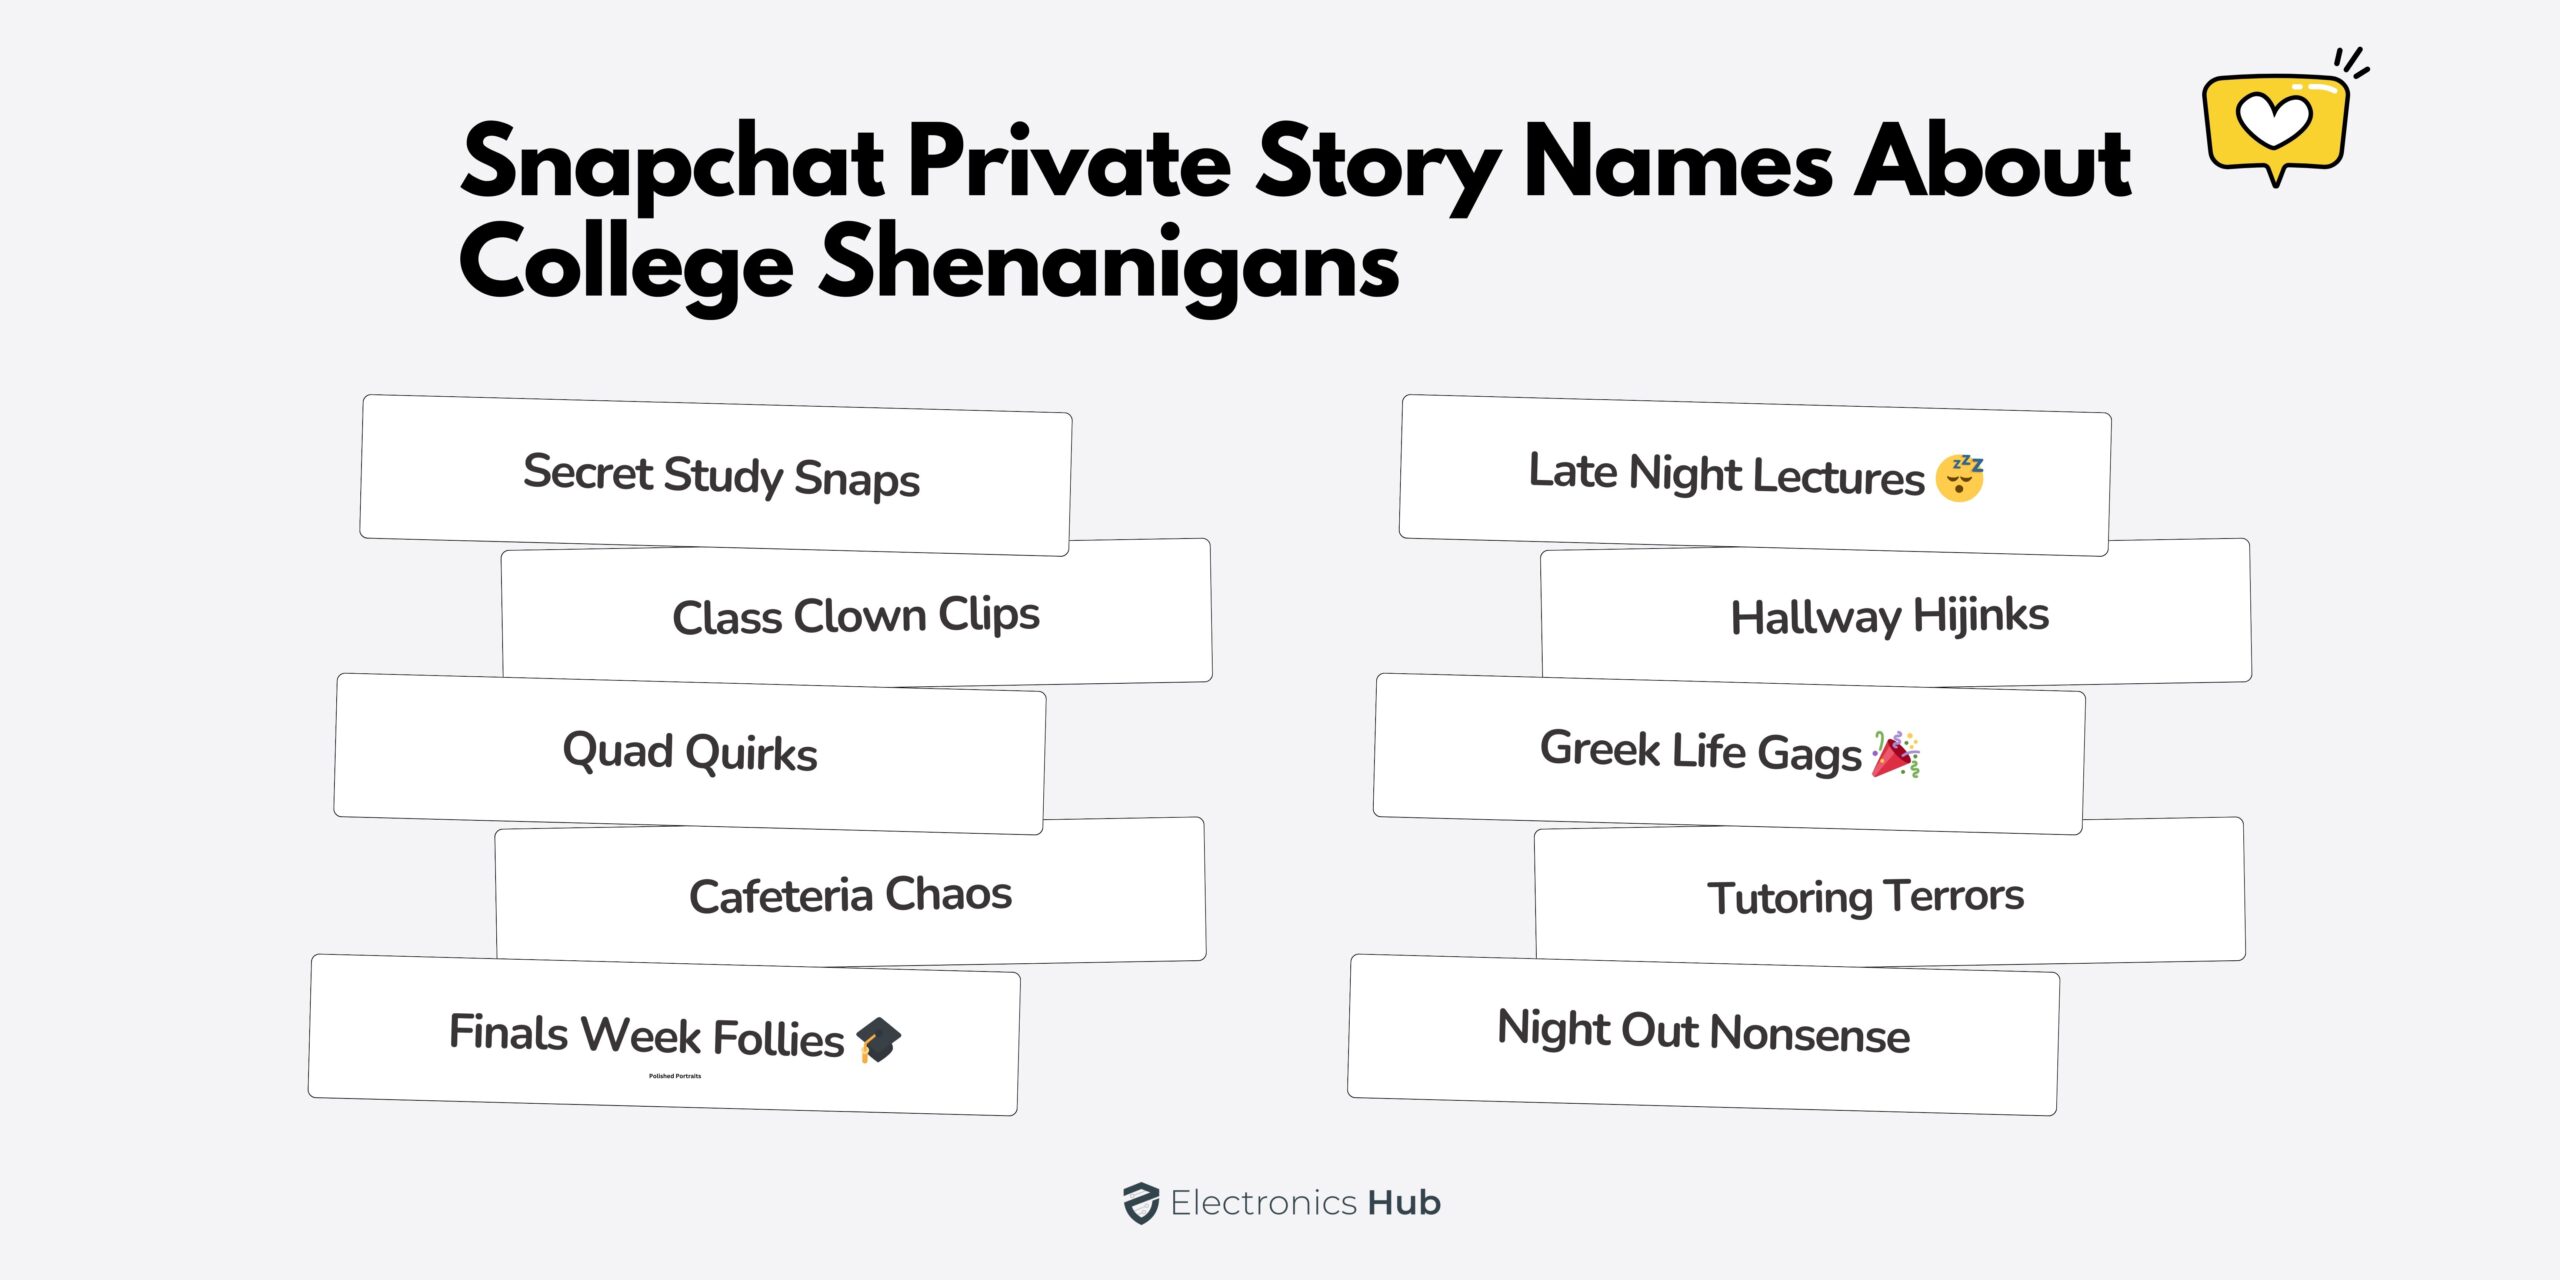 Snapchat Private Story Names for College Shenanigans